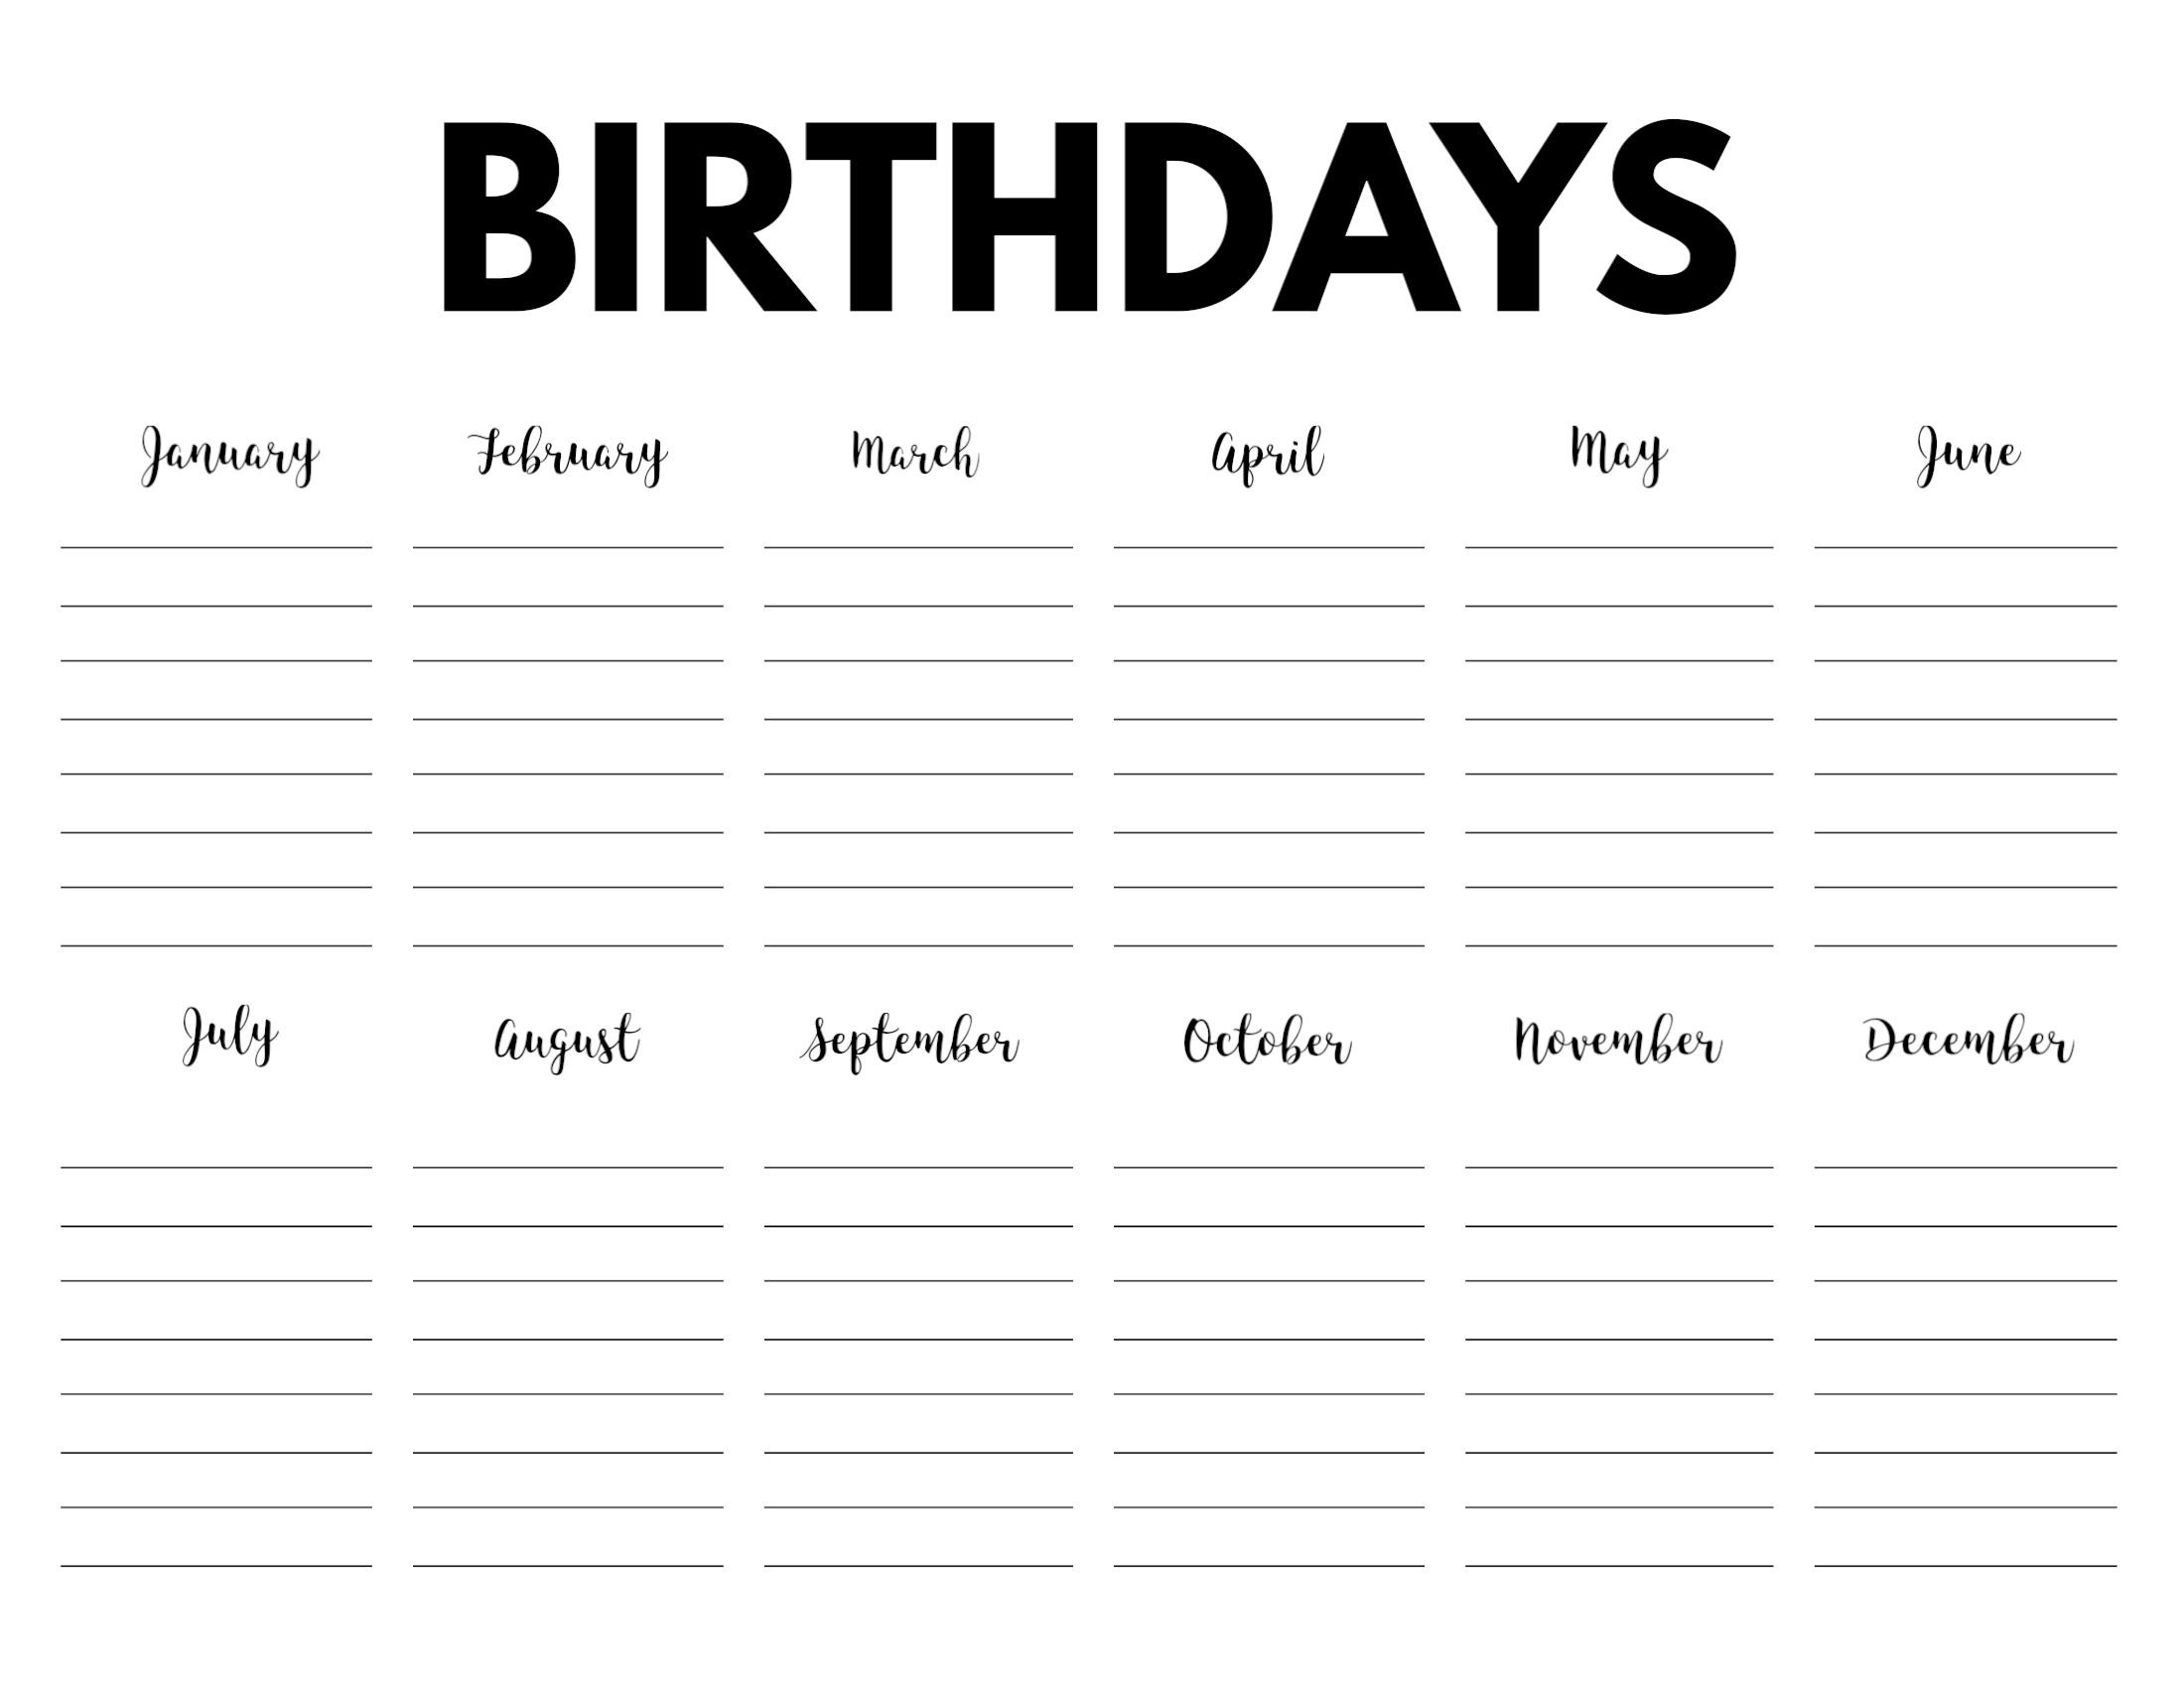 free-printable-birthday-calendar-template-images-and-photos-finder